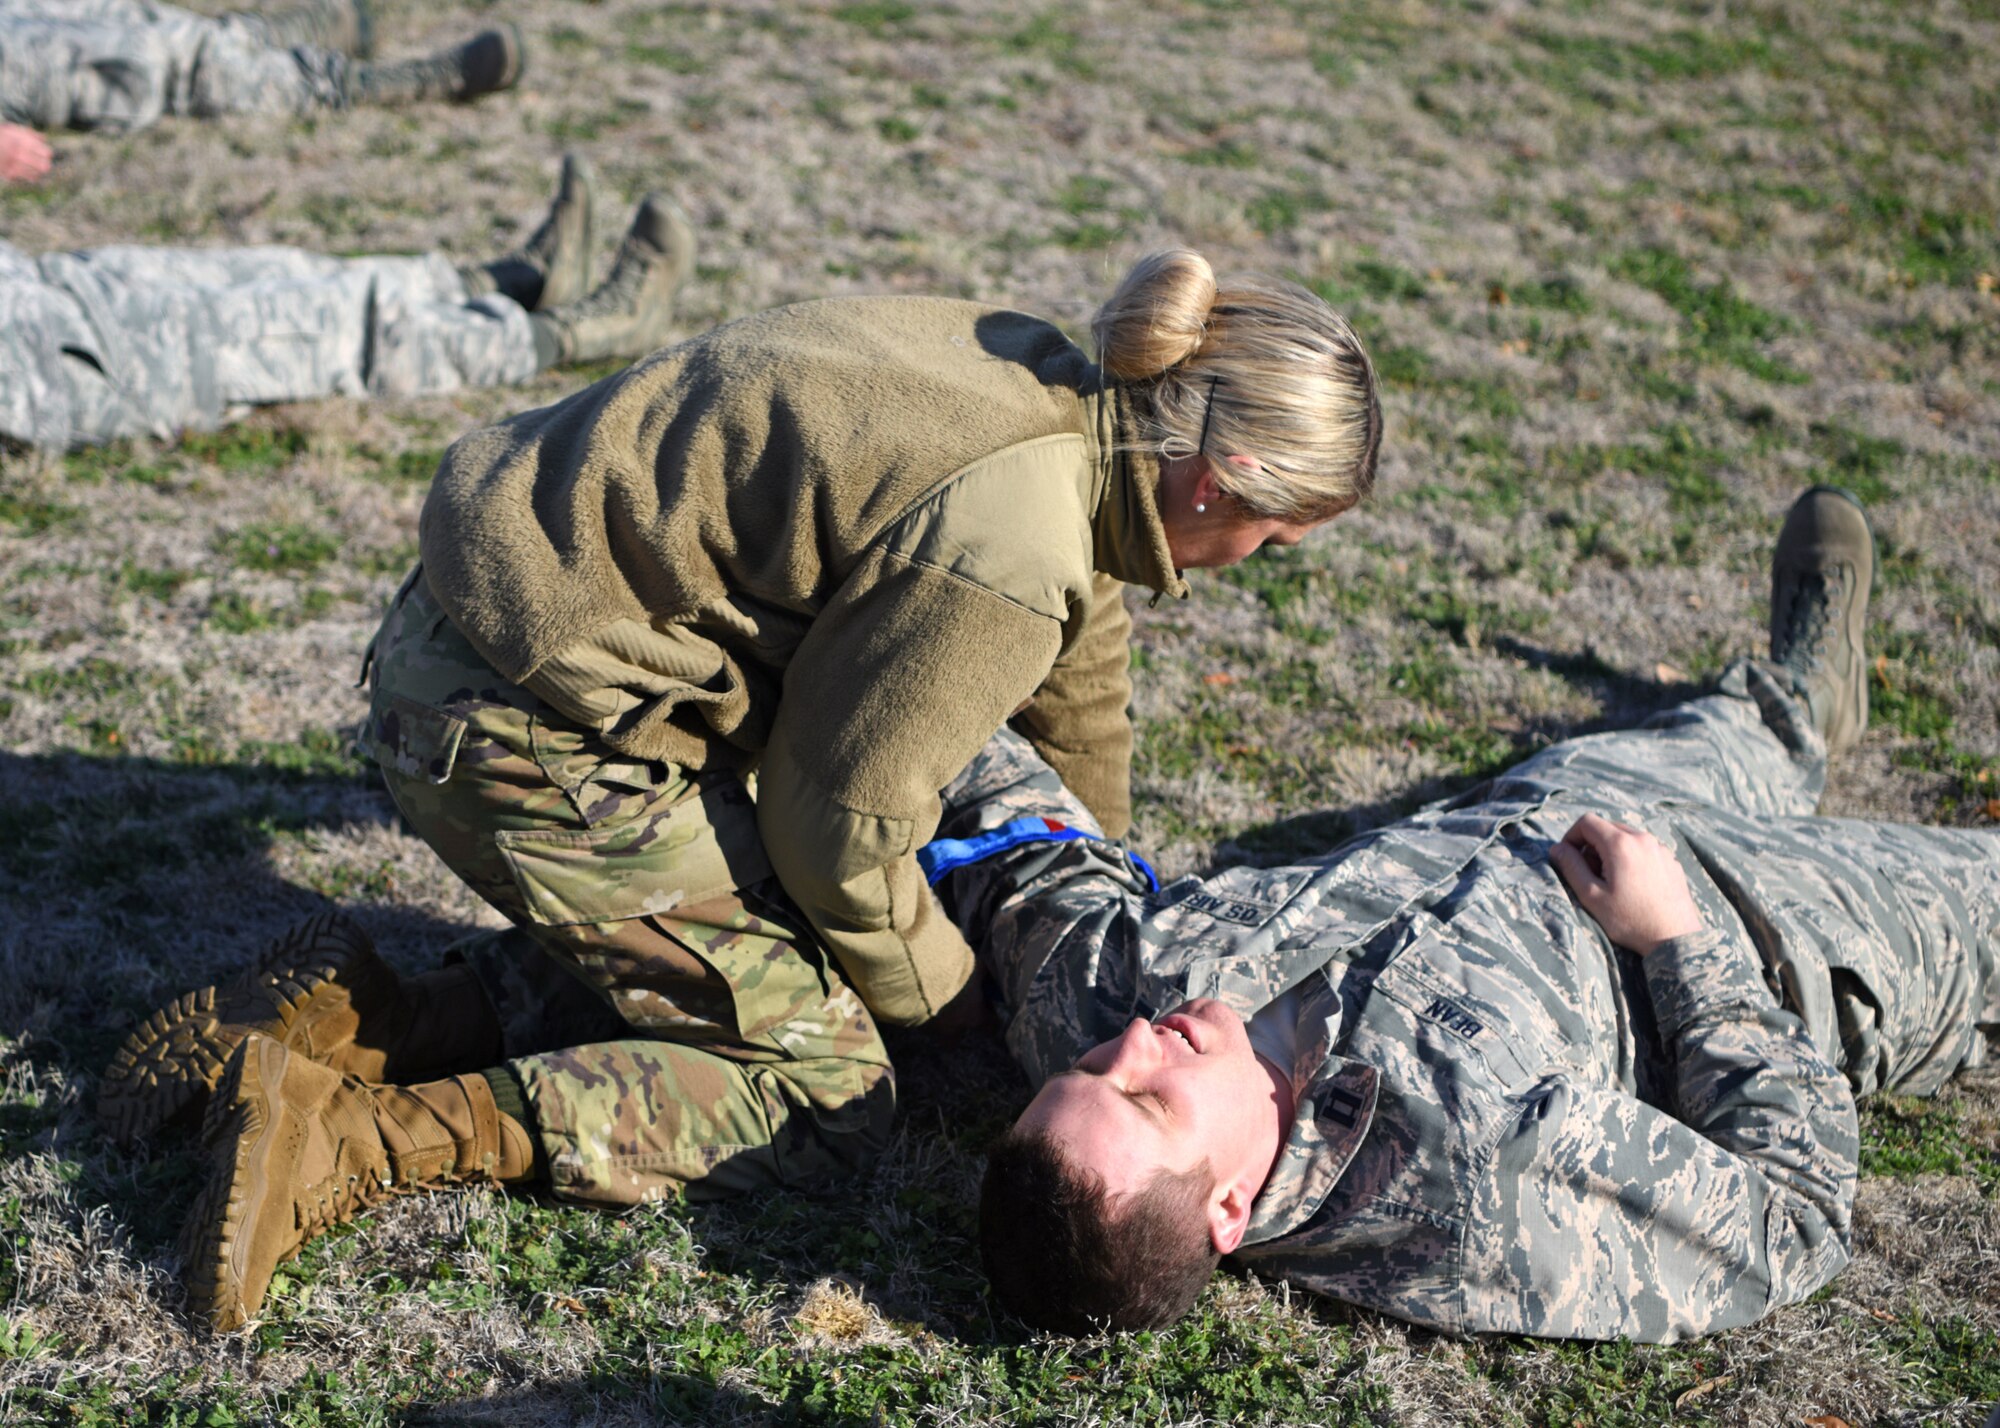 U.S. Air Force Capt. Melissa Seibert, 17th Operational Medical Readiness Squadron dentist, applies a tourniquet to Capt. Matthew Bean, 17th OMRS dentist, during the Tactical Combat Casualty Care course at Goodfellow Air Force Base, Texas, Feb. 21, 2020. TCCC is used to quickly treat wounds in combat situations. (U.S. Air Force photo by Airman 1st Class Ethan Sherwood)